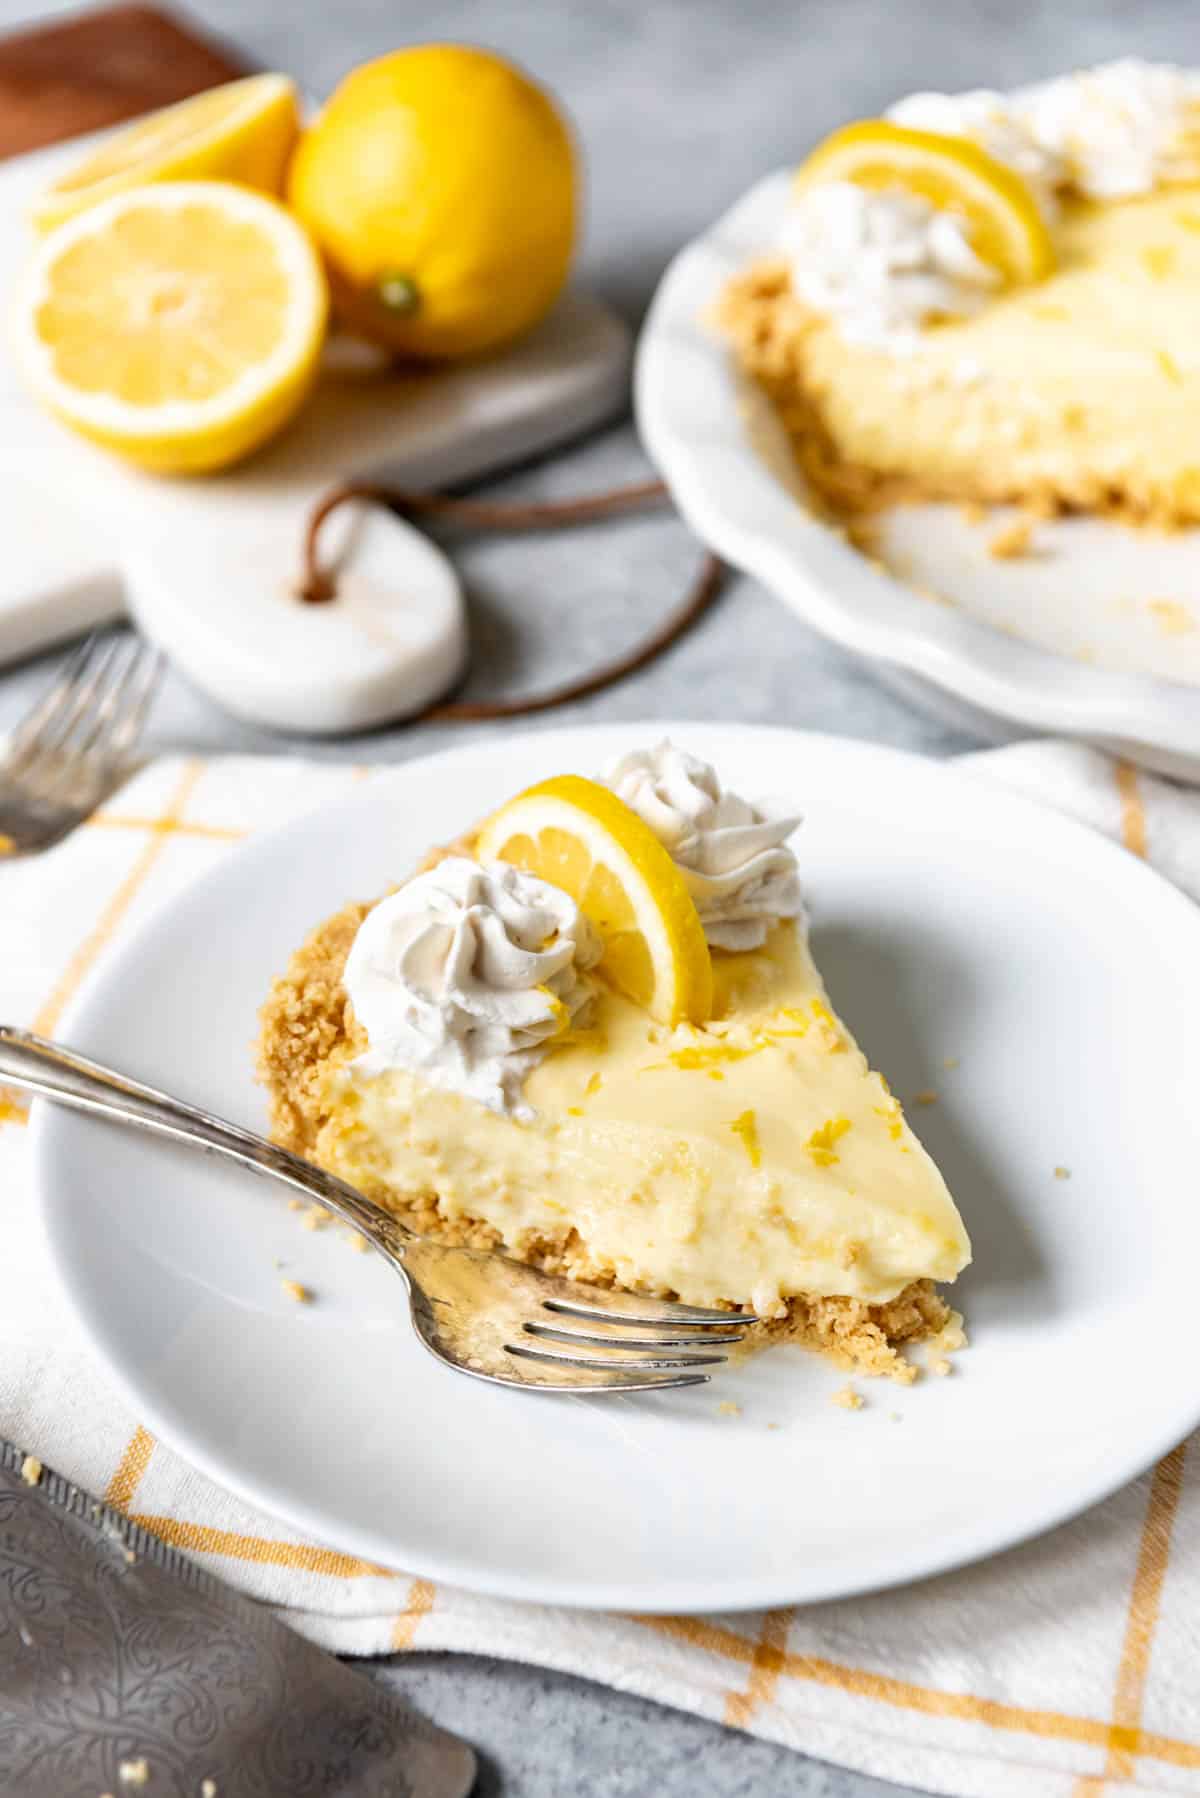 An image of a no-bake pie with a golden Oreo crust, filled with a creamy sour cream lemon pie filling and topped with sweetened whipped cream.